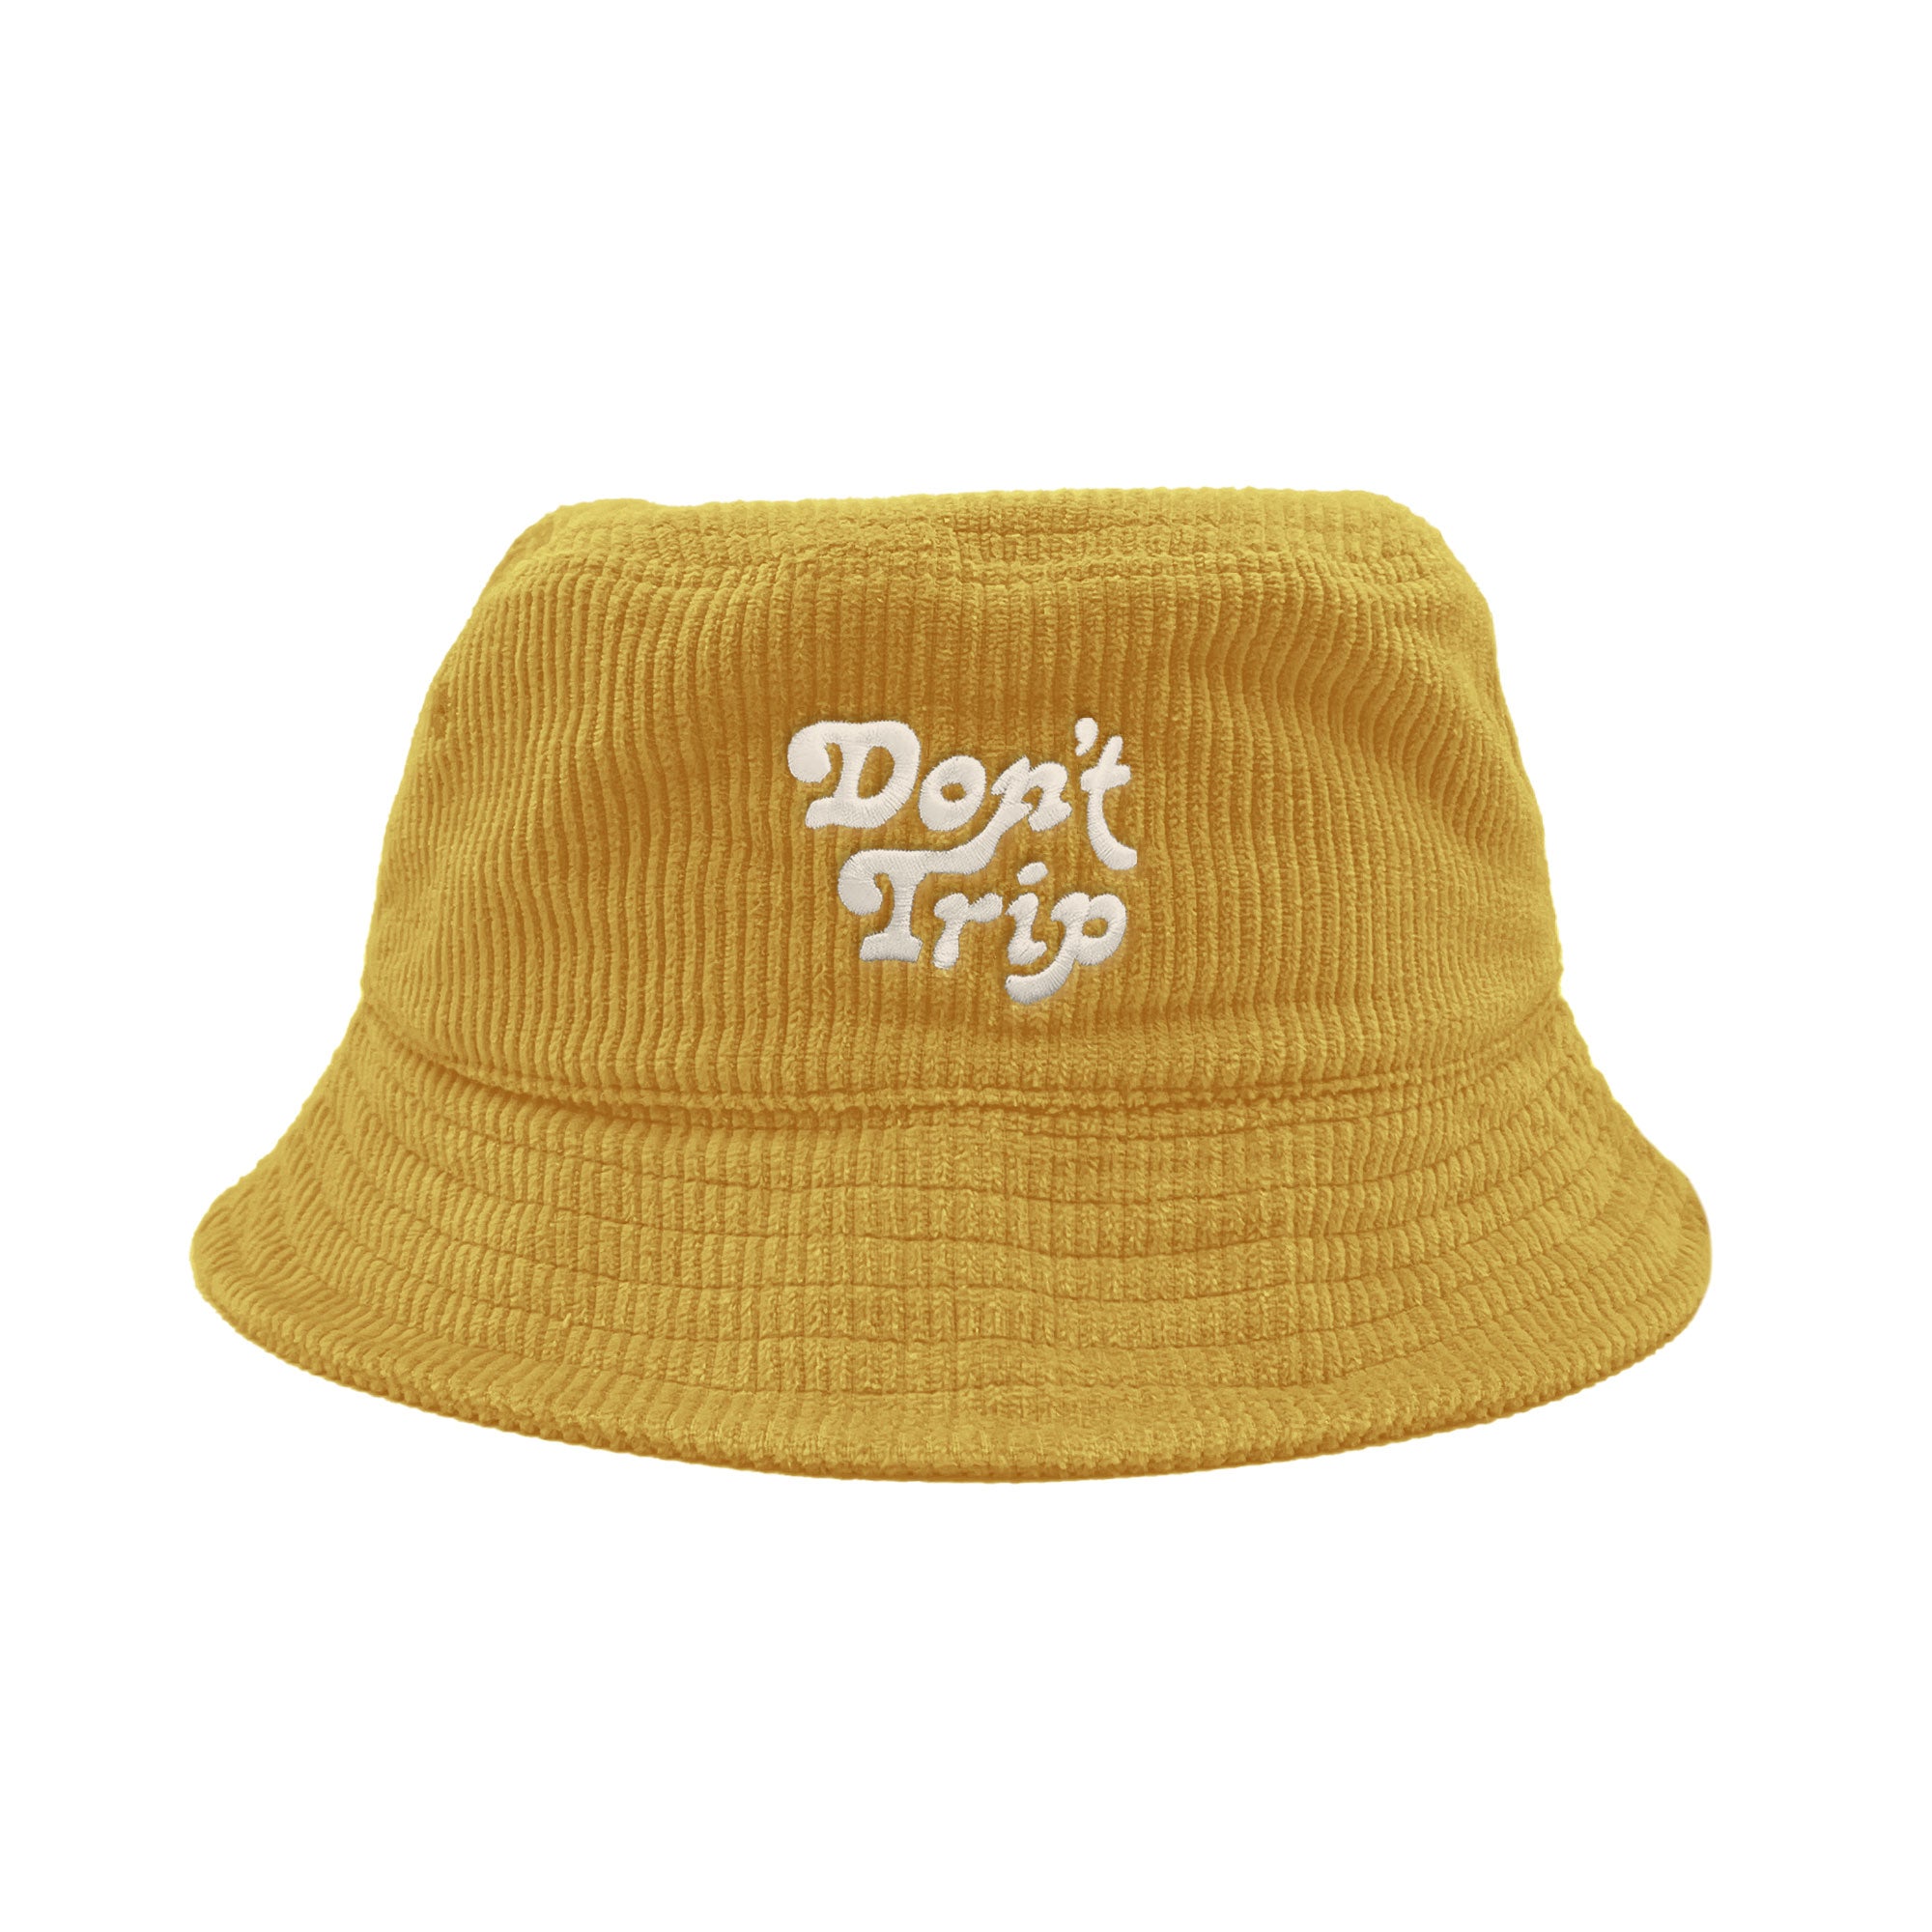 Free & Easy Don't Trip Fat Corduroy Bucket Hat in gold with white Don't Trip embroidery on a white background - Free & Easy